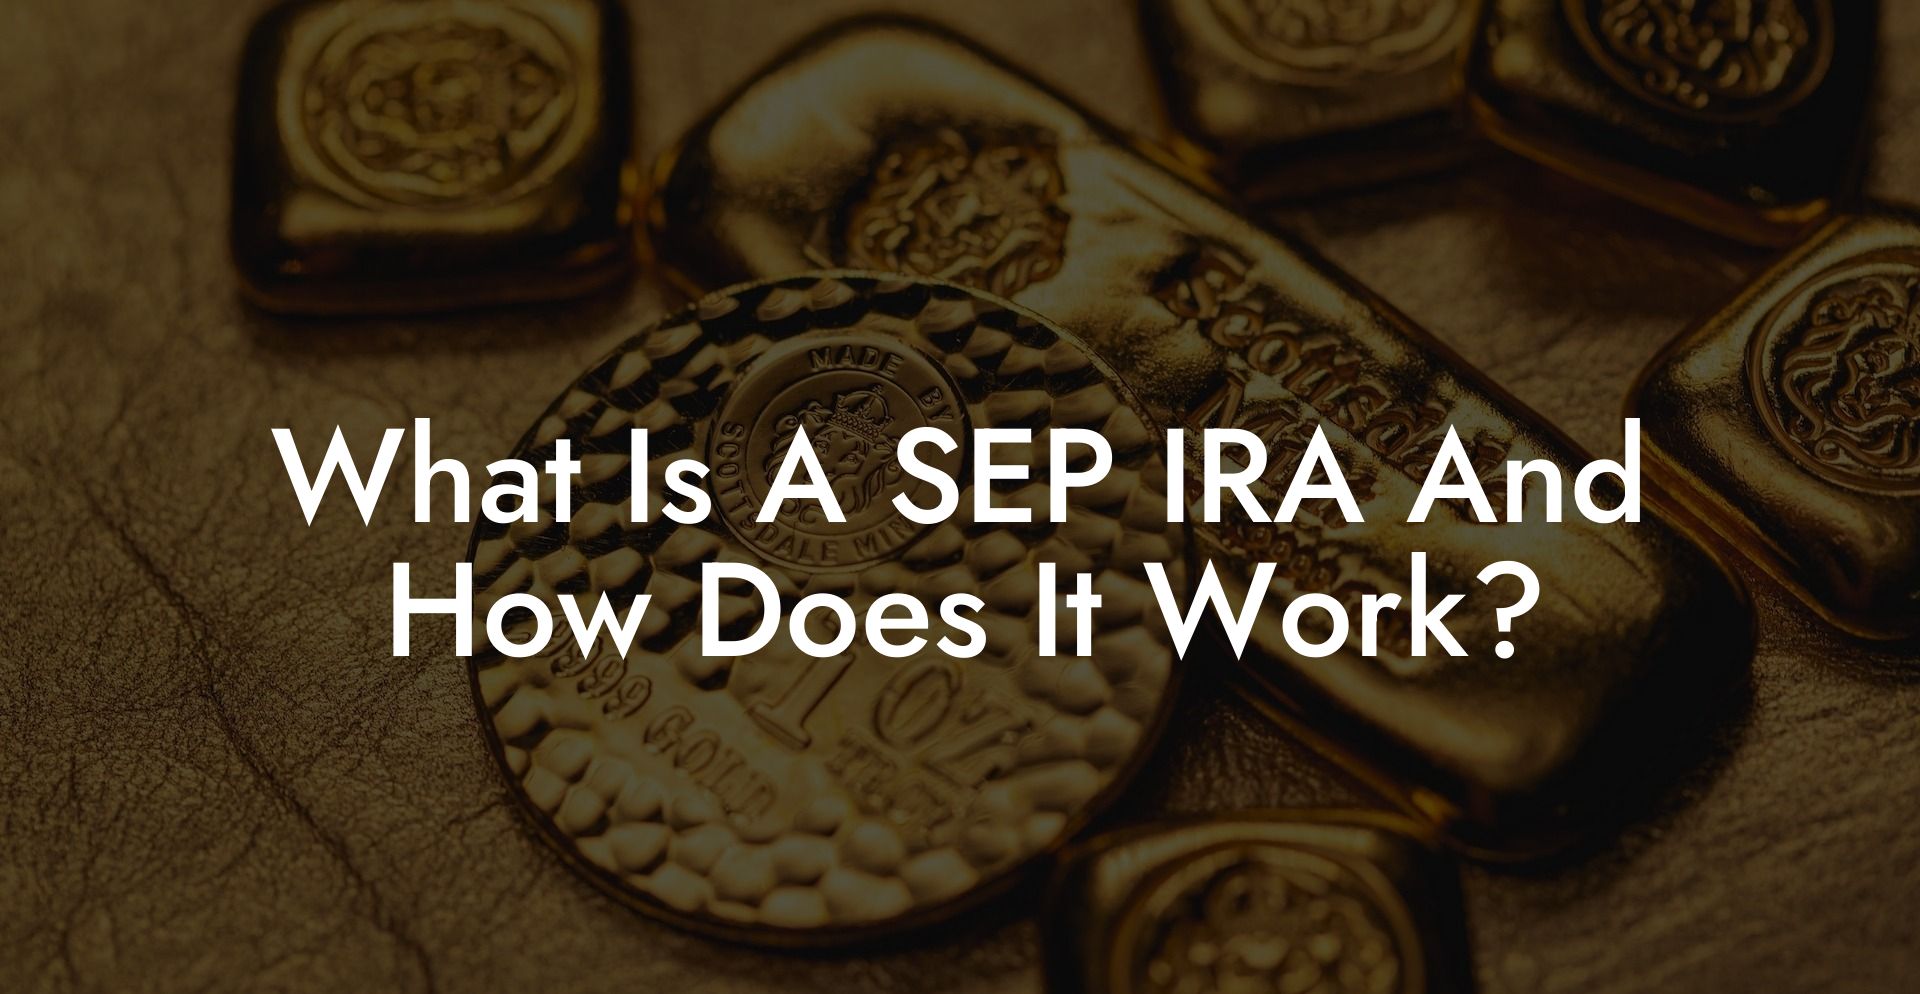 What Is A SEP IRA And How Does It Work?